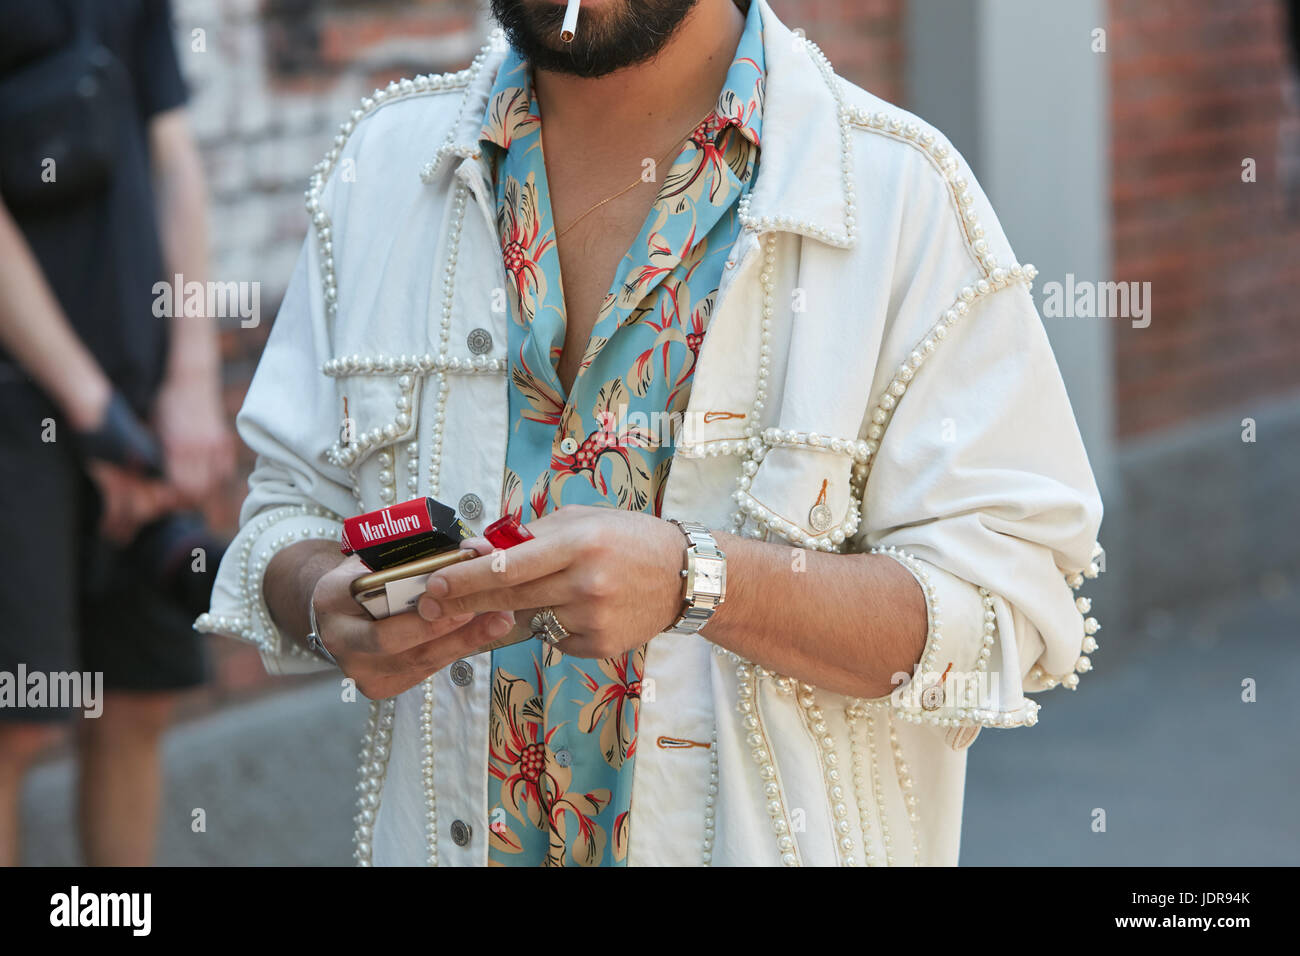 MILAN - JUNE 19: Man with white jeans jacket decorated with pearls and Cartier watch before Fendi fashion show, Milan Fashion Week street style on Jun Stock Photo